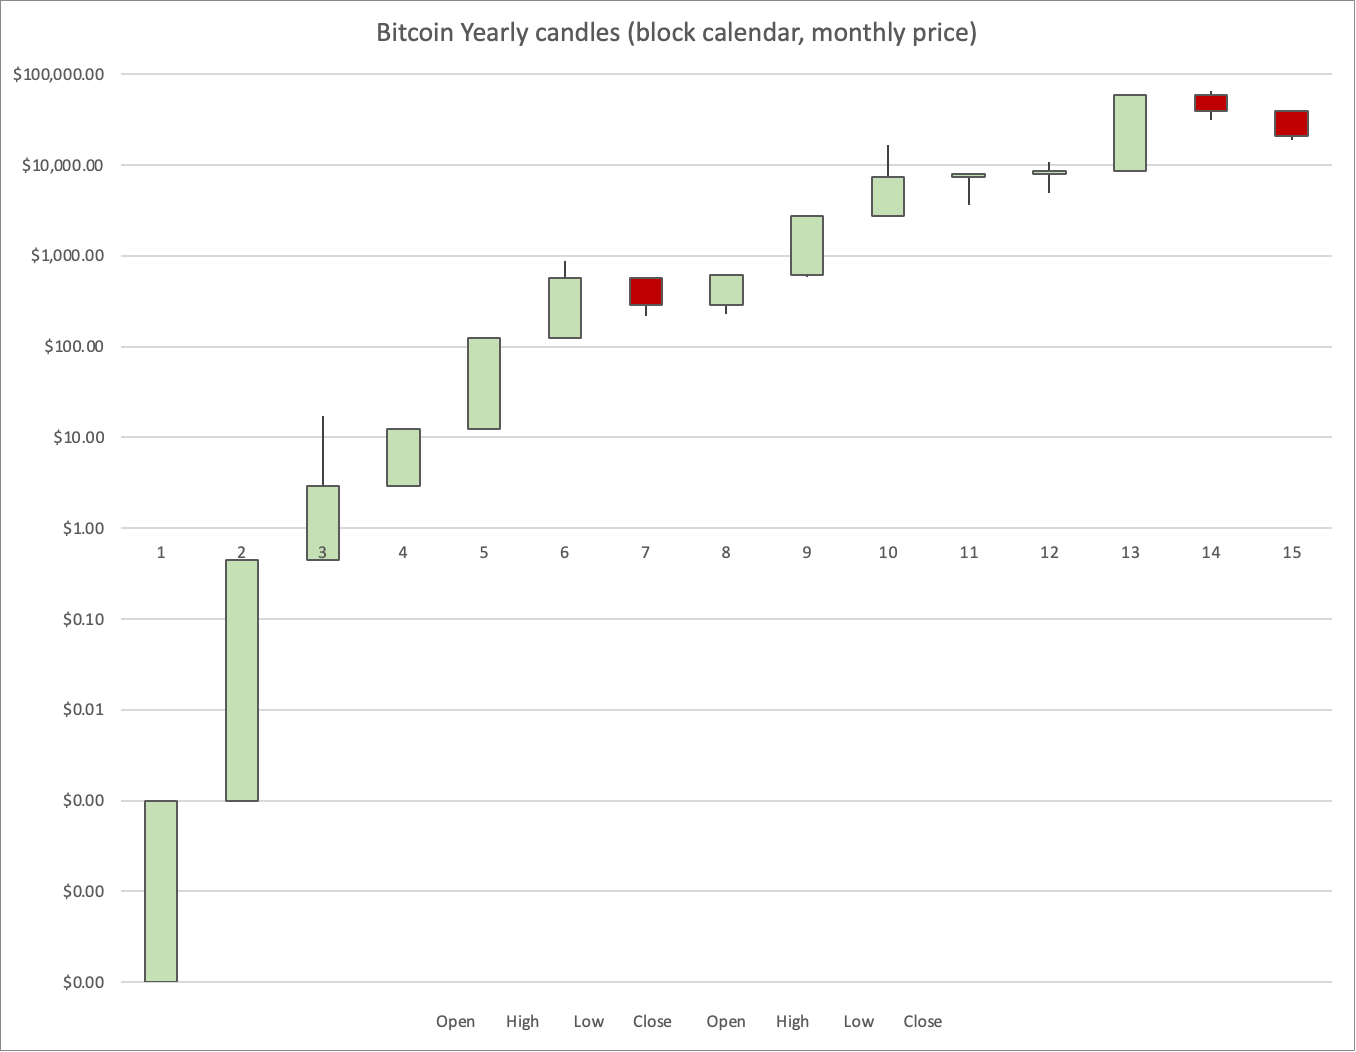 Bitcoin yearly candles using a block calendar. We are now in candle 15, a half-yearly candle at this point. This crypto winter looks longer with two red candles.